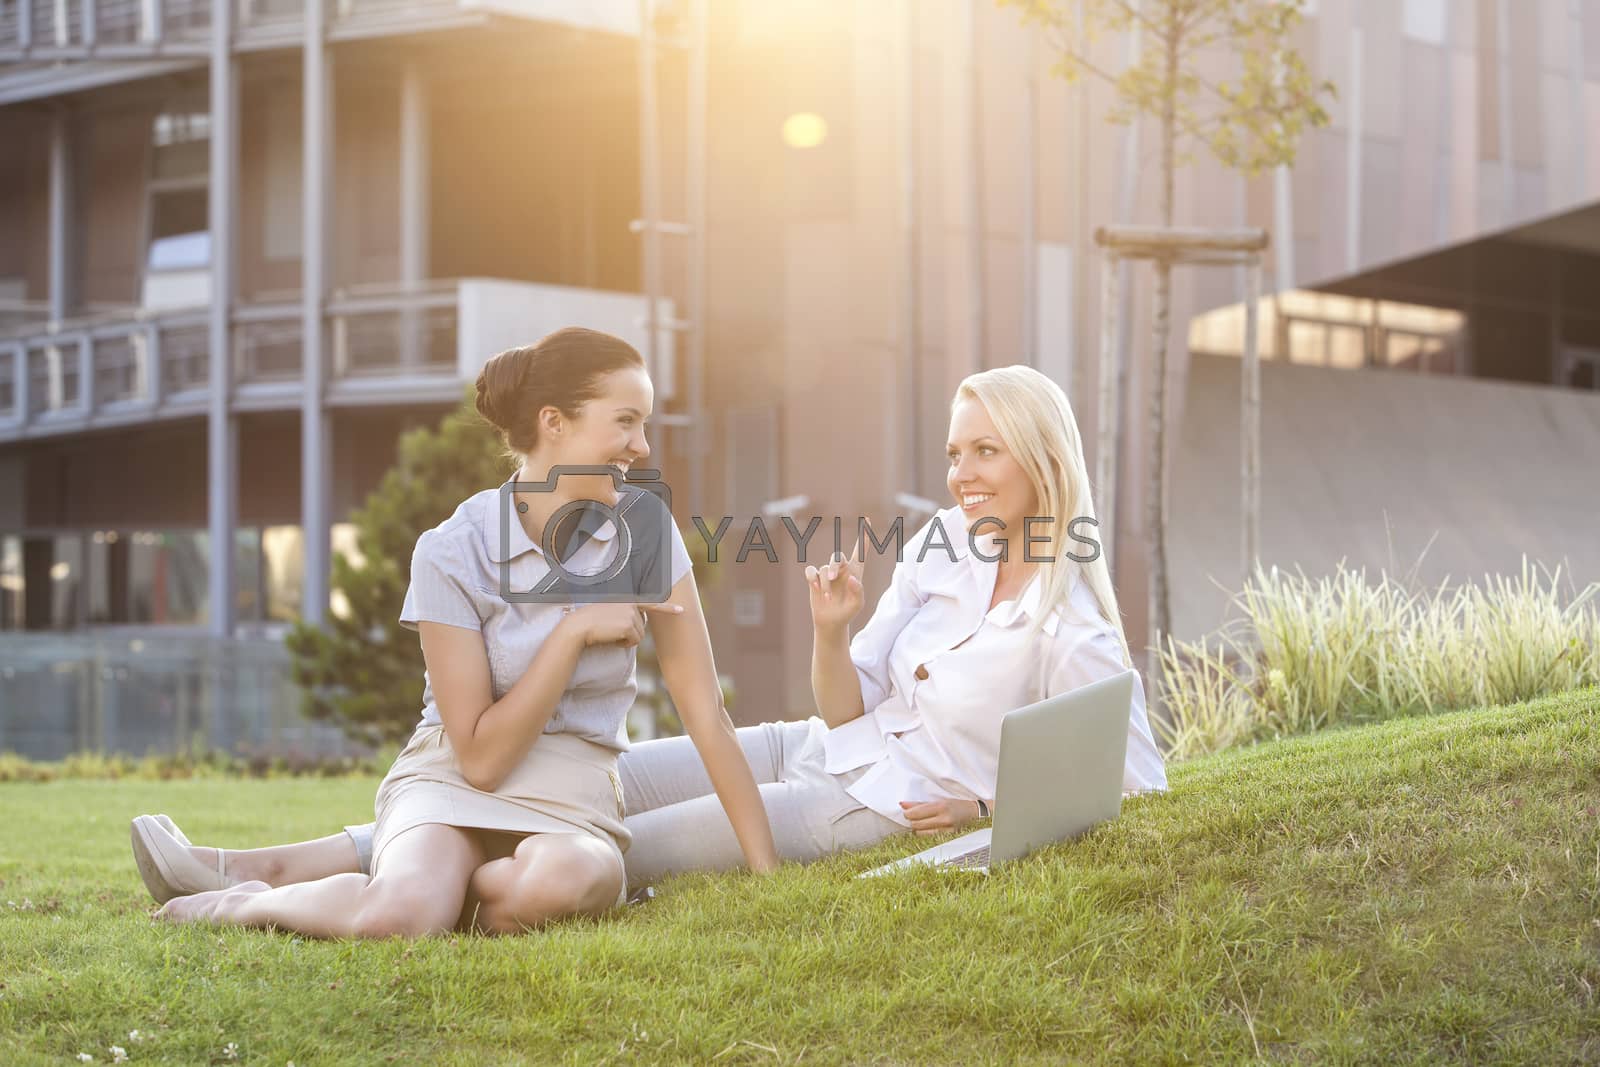 Royalty free image of Young businesswomen spending leisure time on office lawn by moodboard